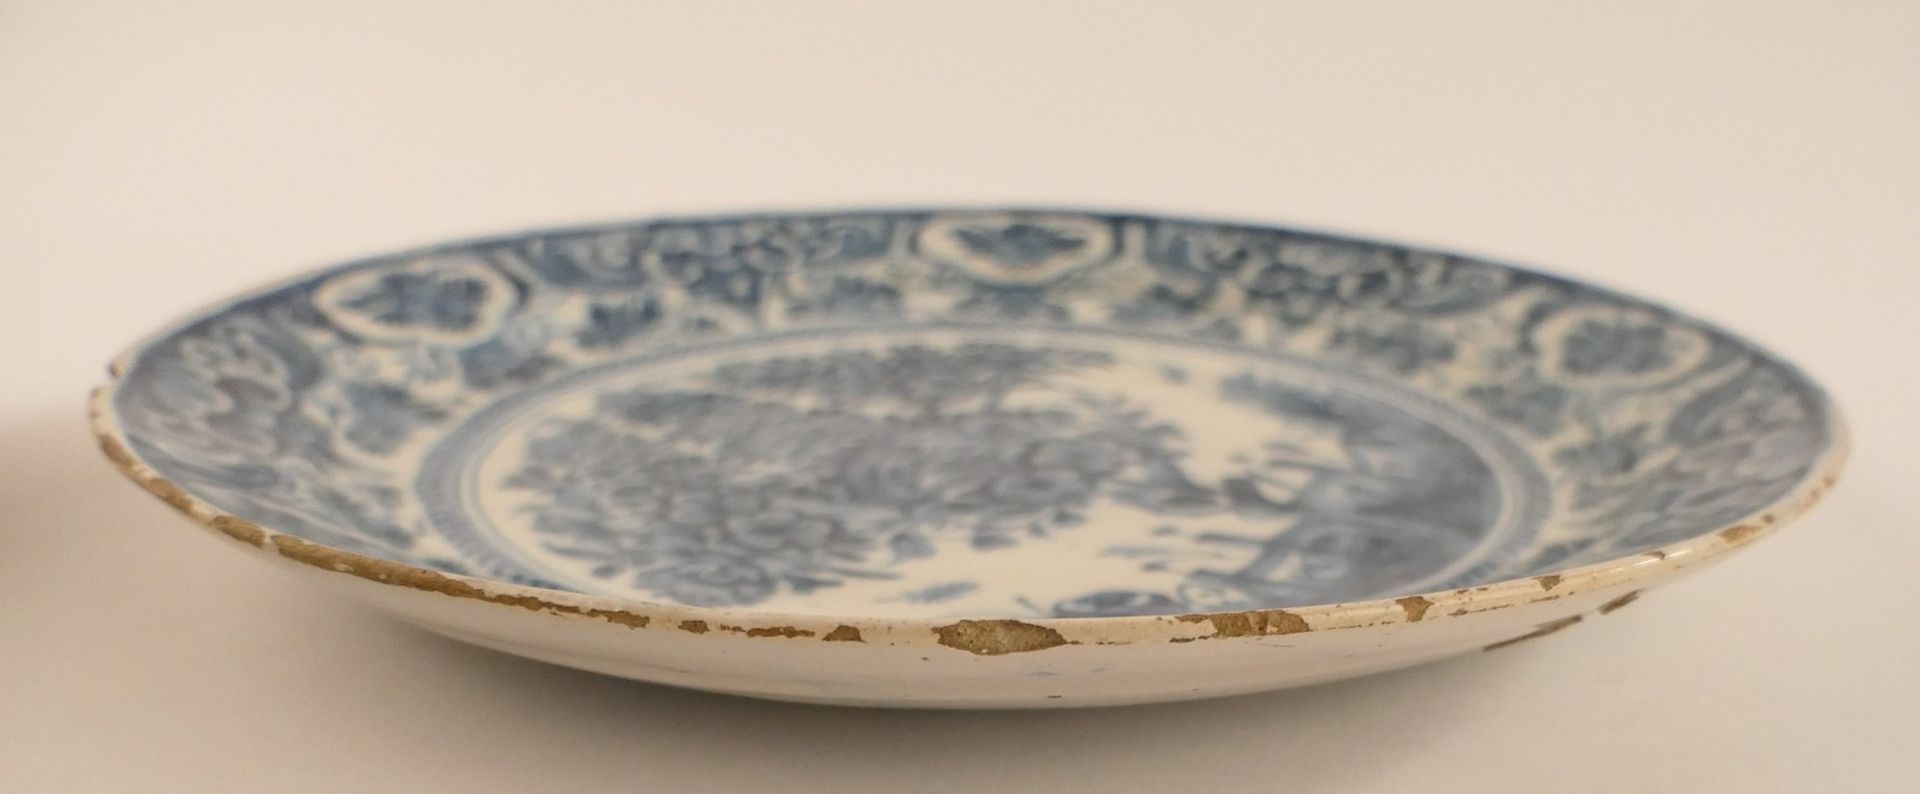 A blue and white 'theeboom' decorated Dutch Delftware plate, marked 'De Witte Starre', Diameter 28 - Image 9 of 9